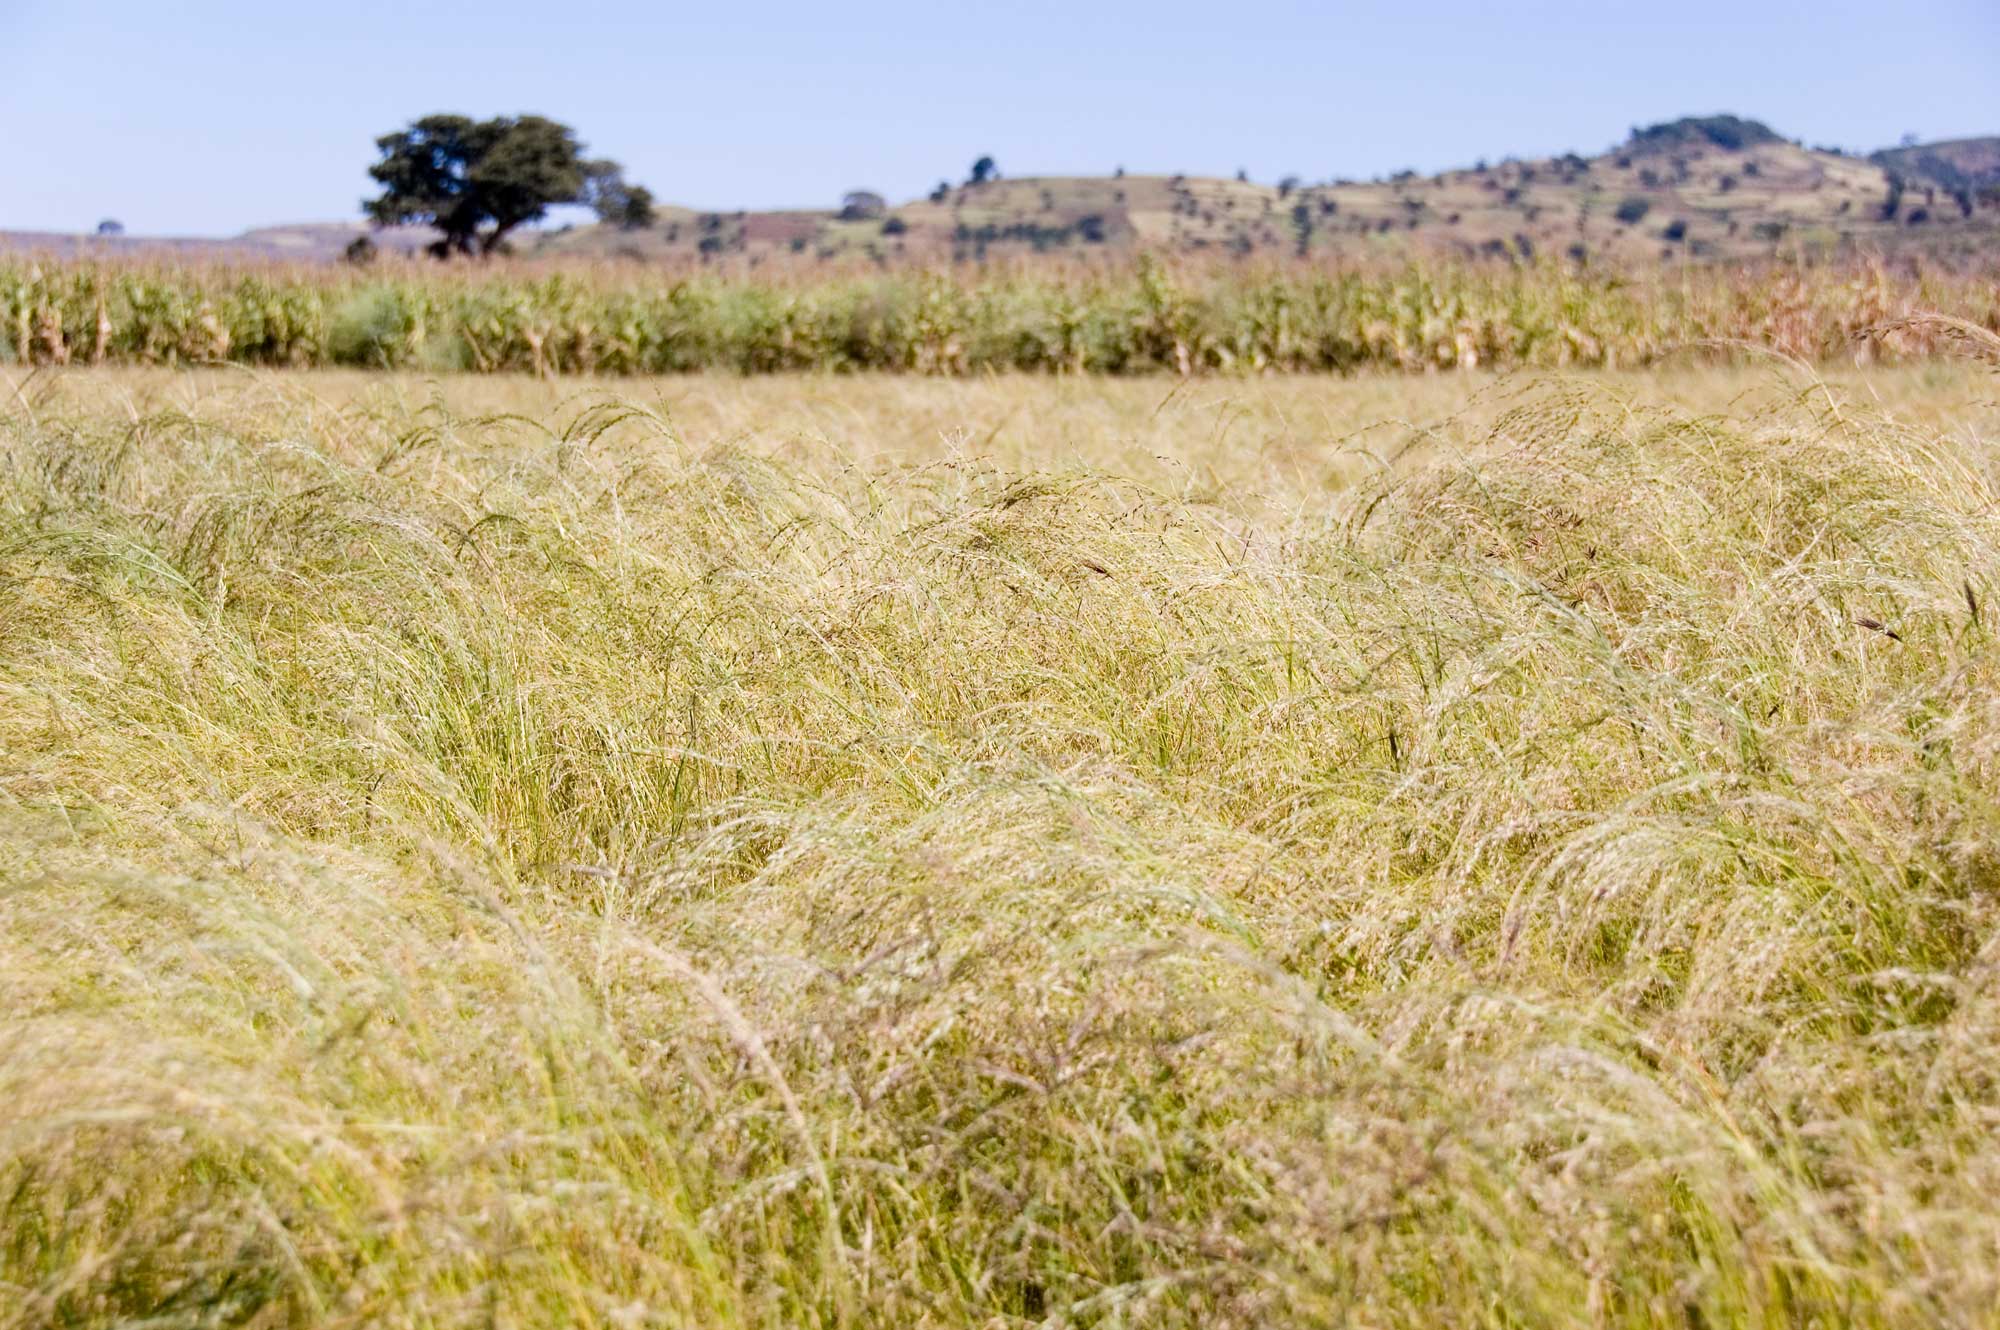 Photograph of a field of teff in Ethiopia. The photograph shows a field of yellow grasses with nodding inflorescences.